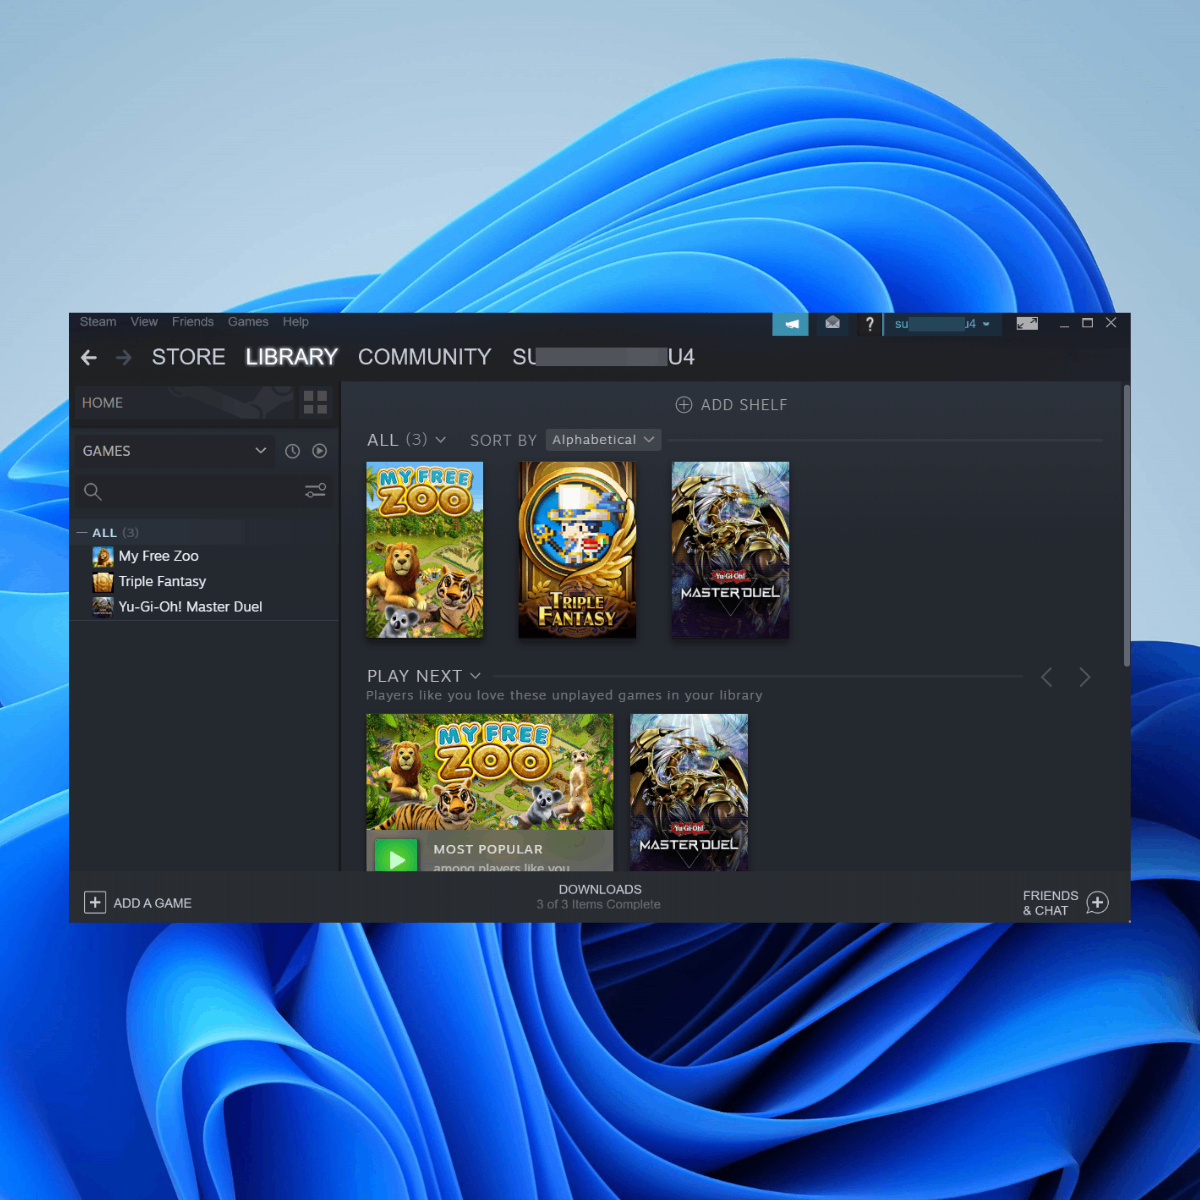 How to Download Games for Free From Steam 